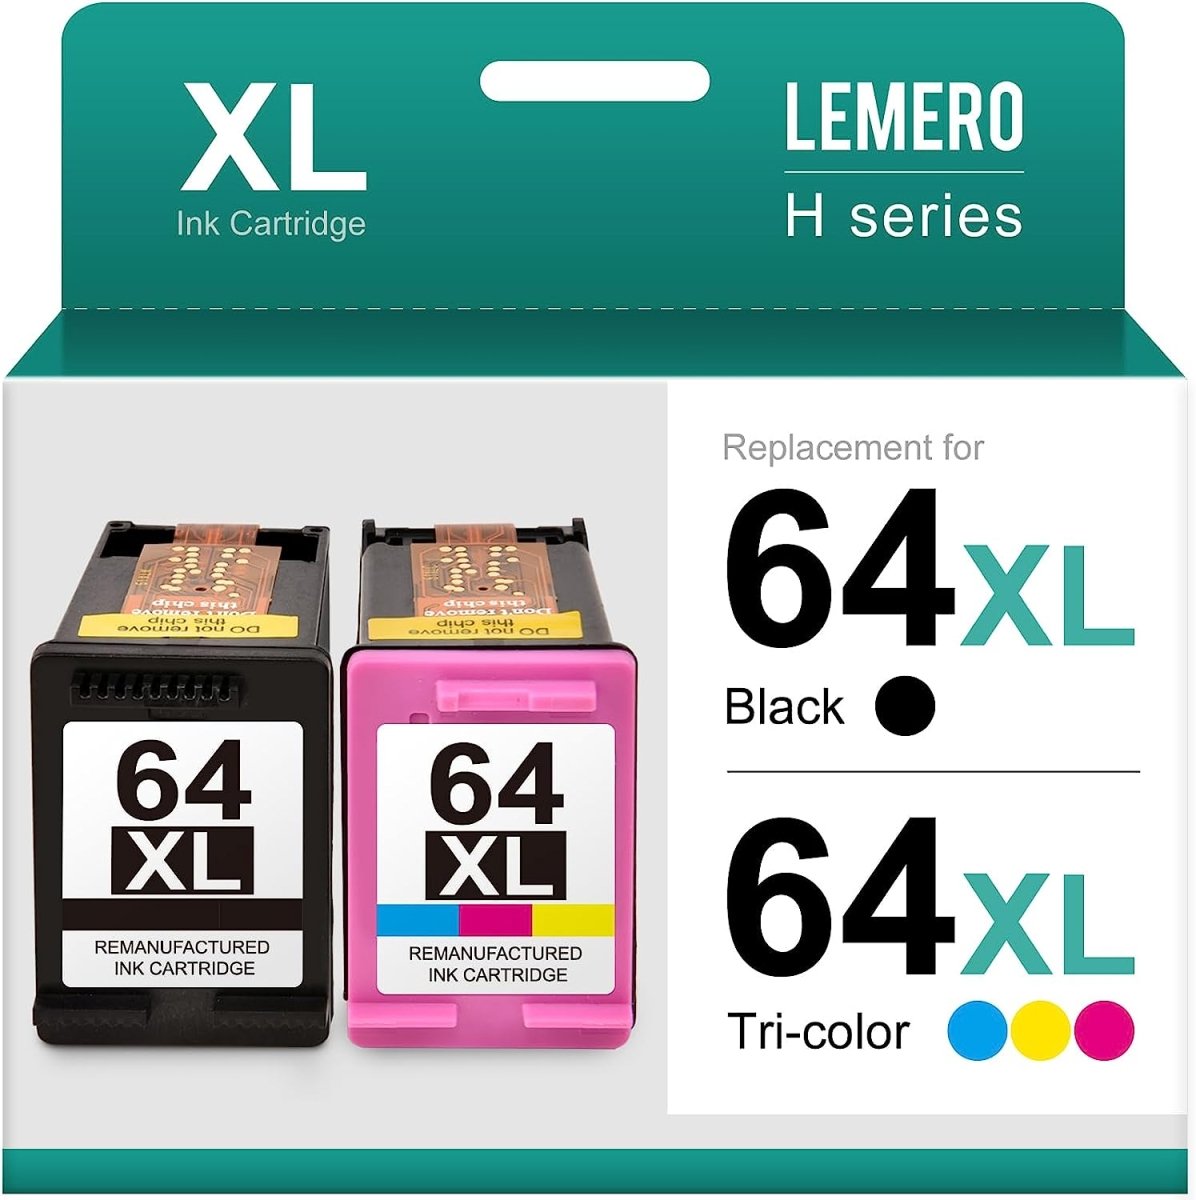 HP 950XL/951XL Black and Tri-Color High-Yield Remanufactured Ink Cartridge  Bundle